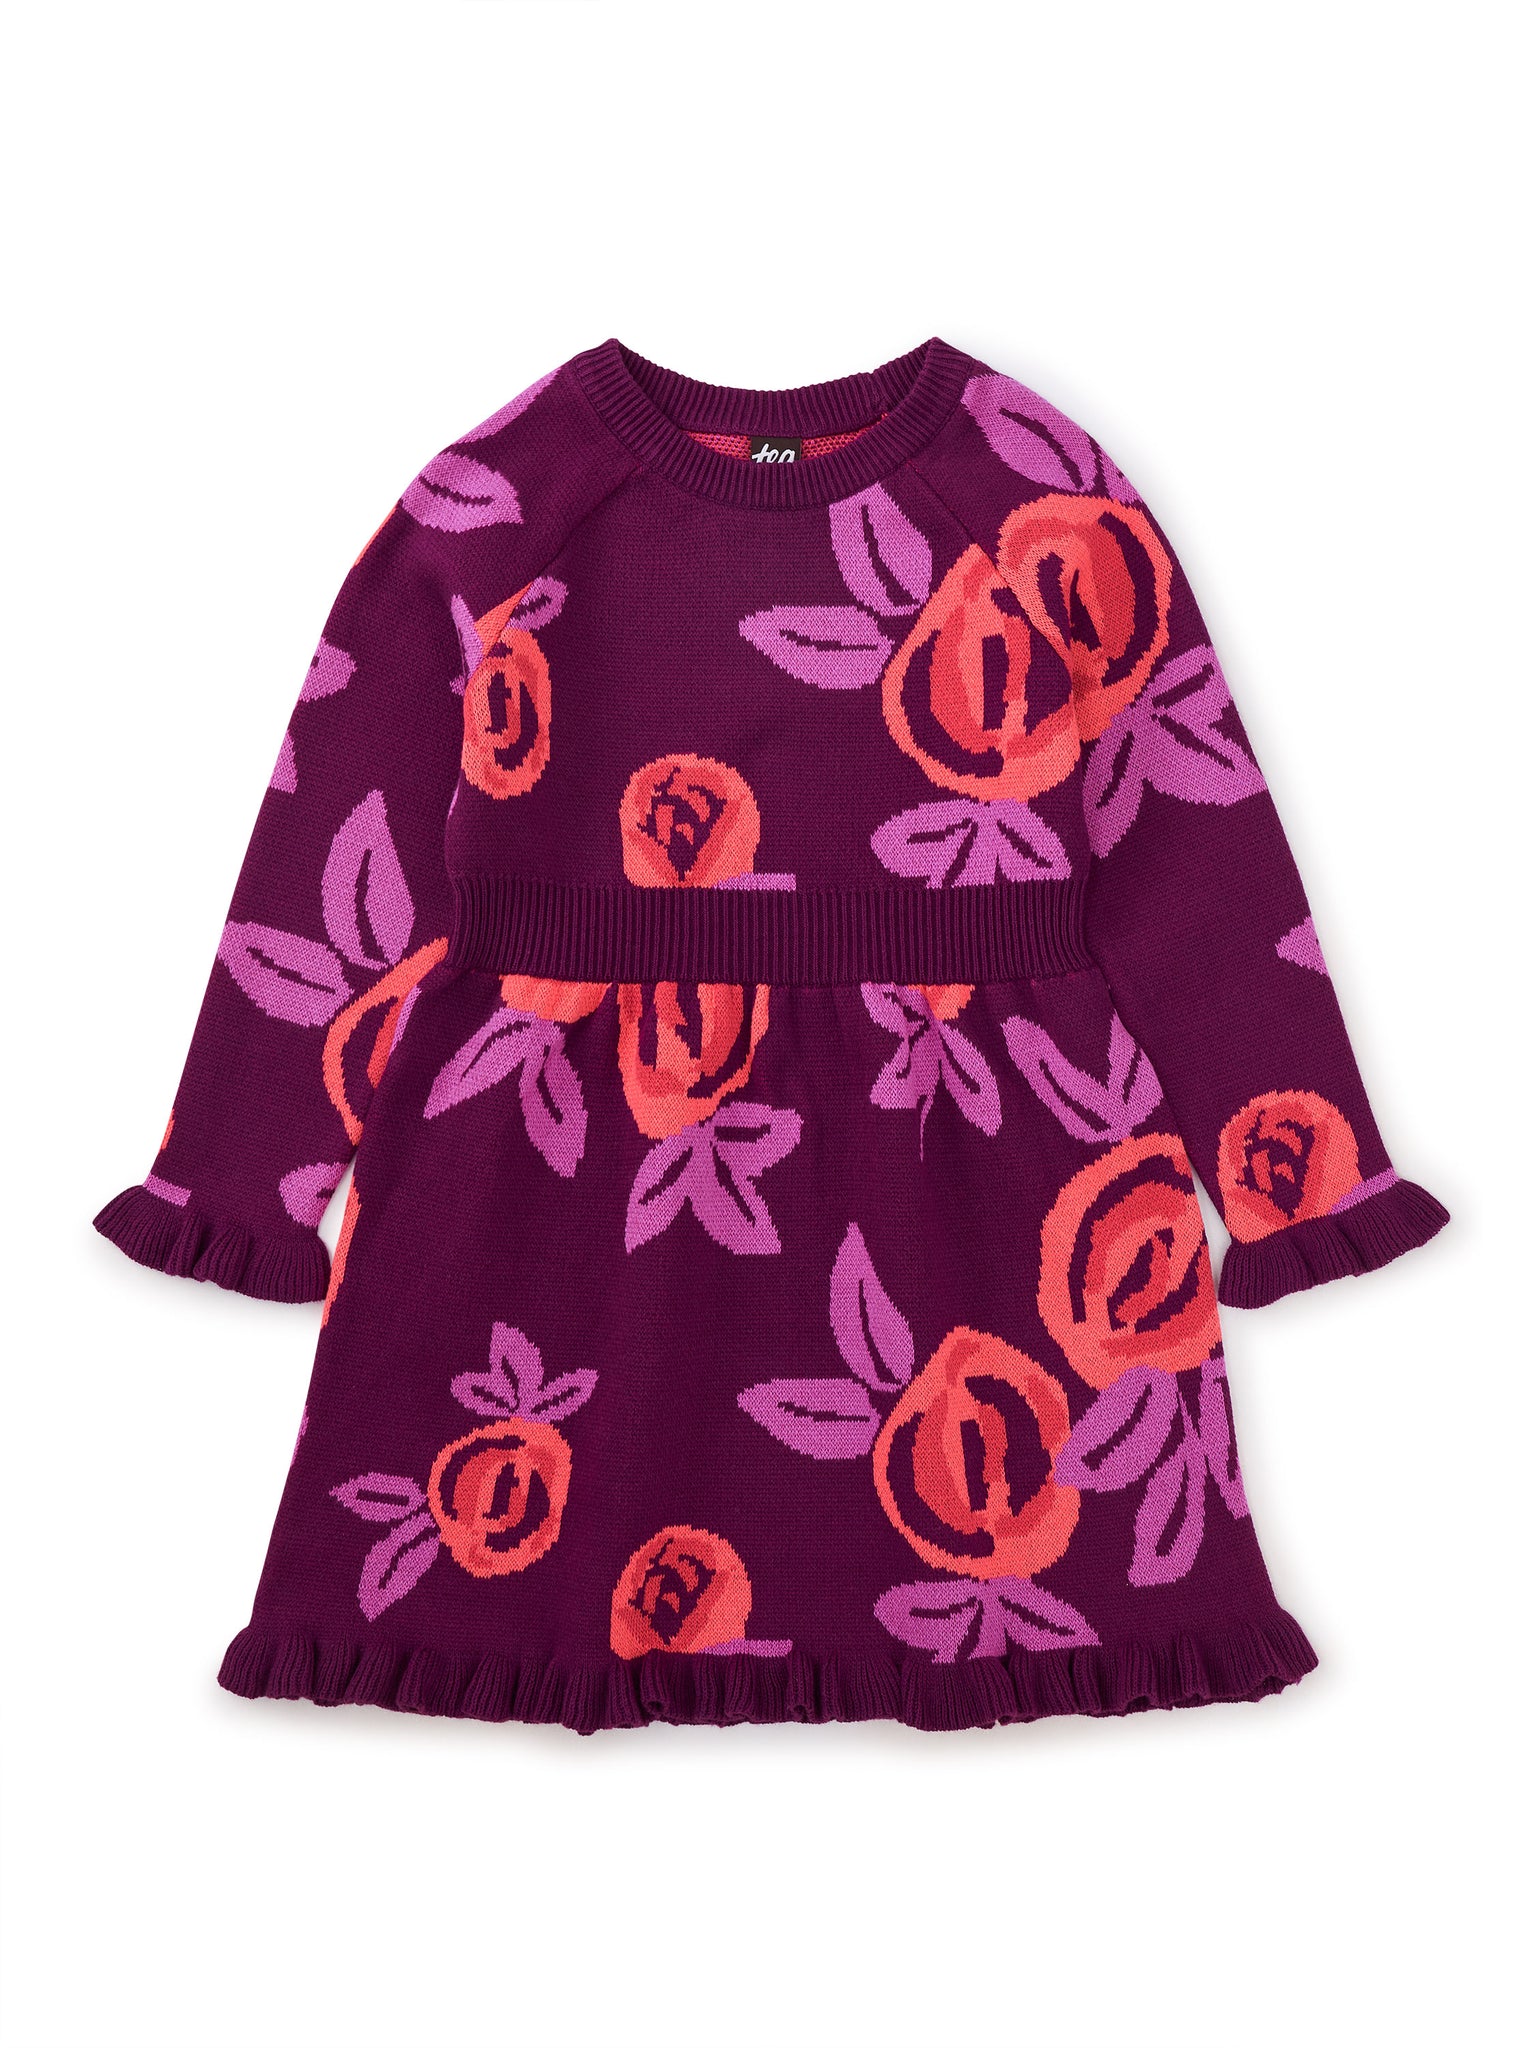 French Rose Sweater Dress